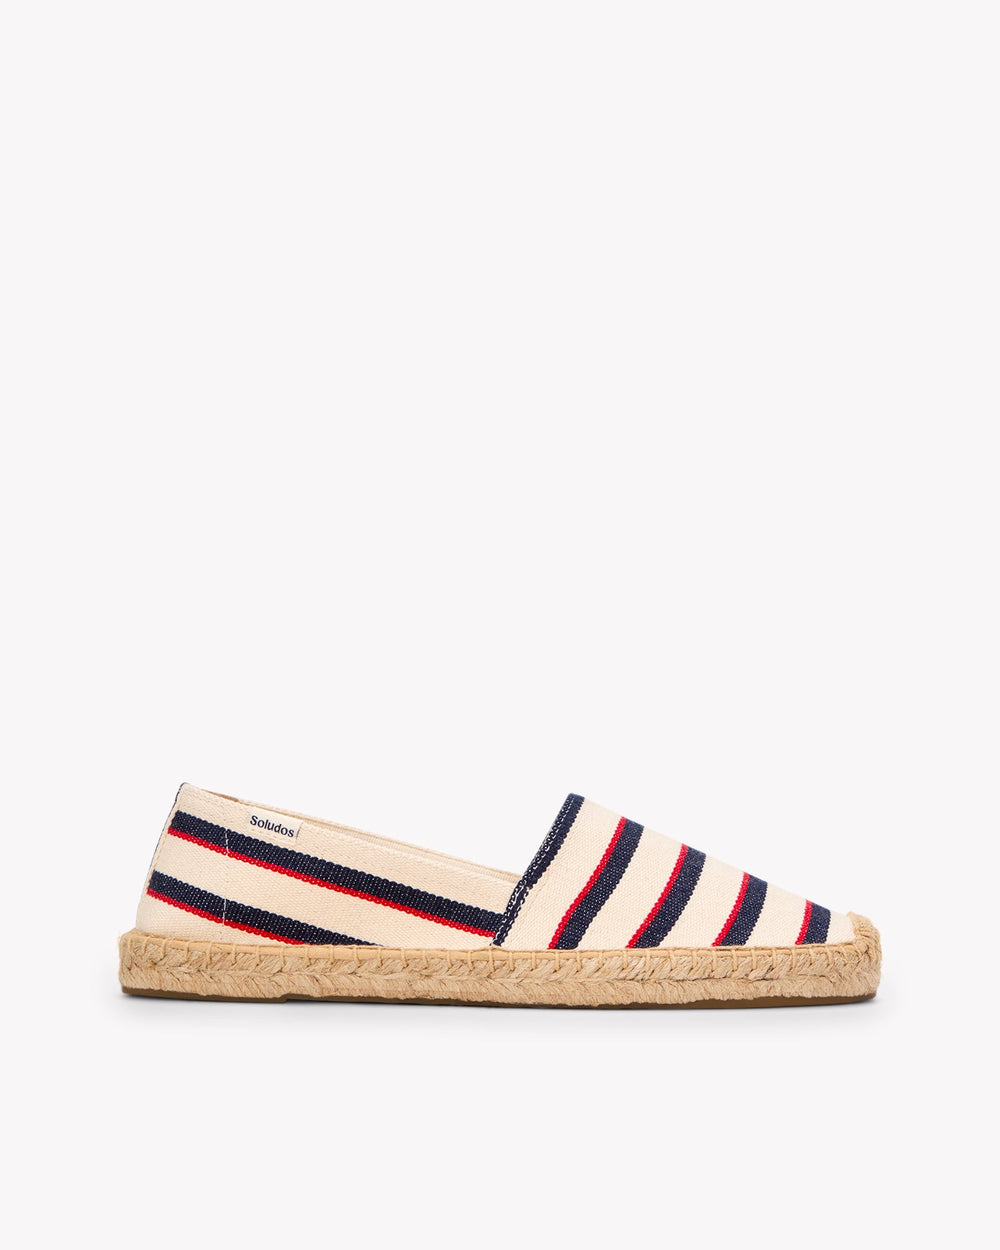 The Original Espadrille - Classic Stripes - Ivory / Navy / Red - Women's